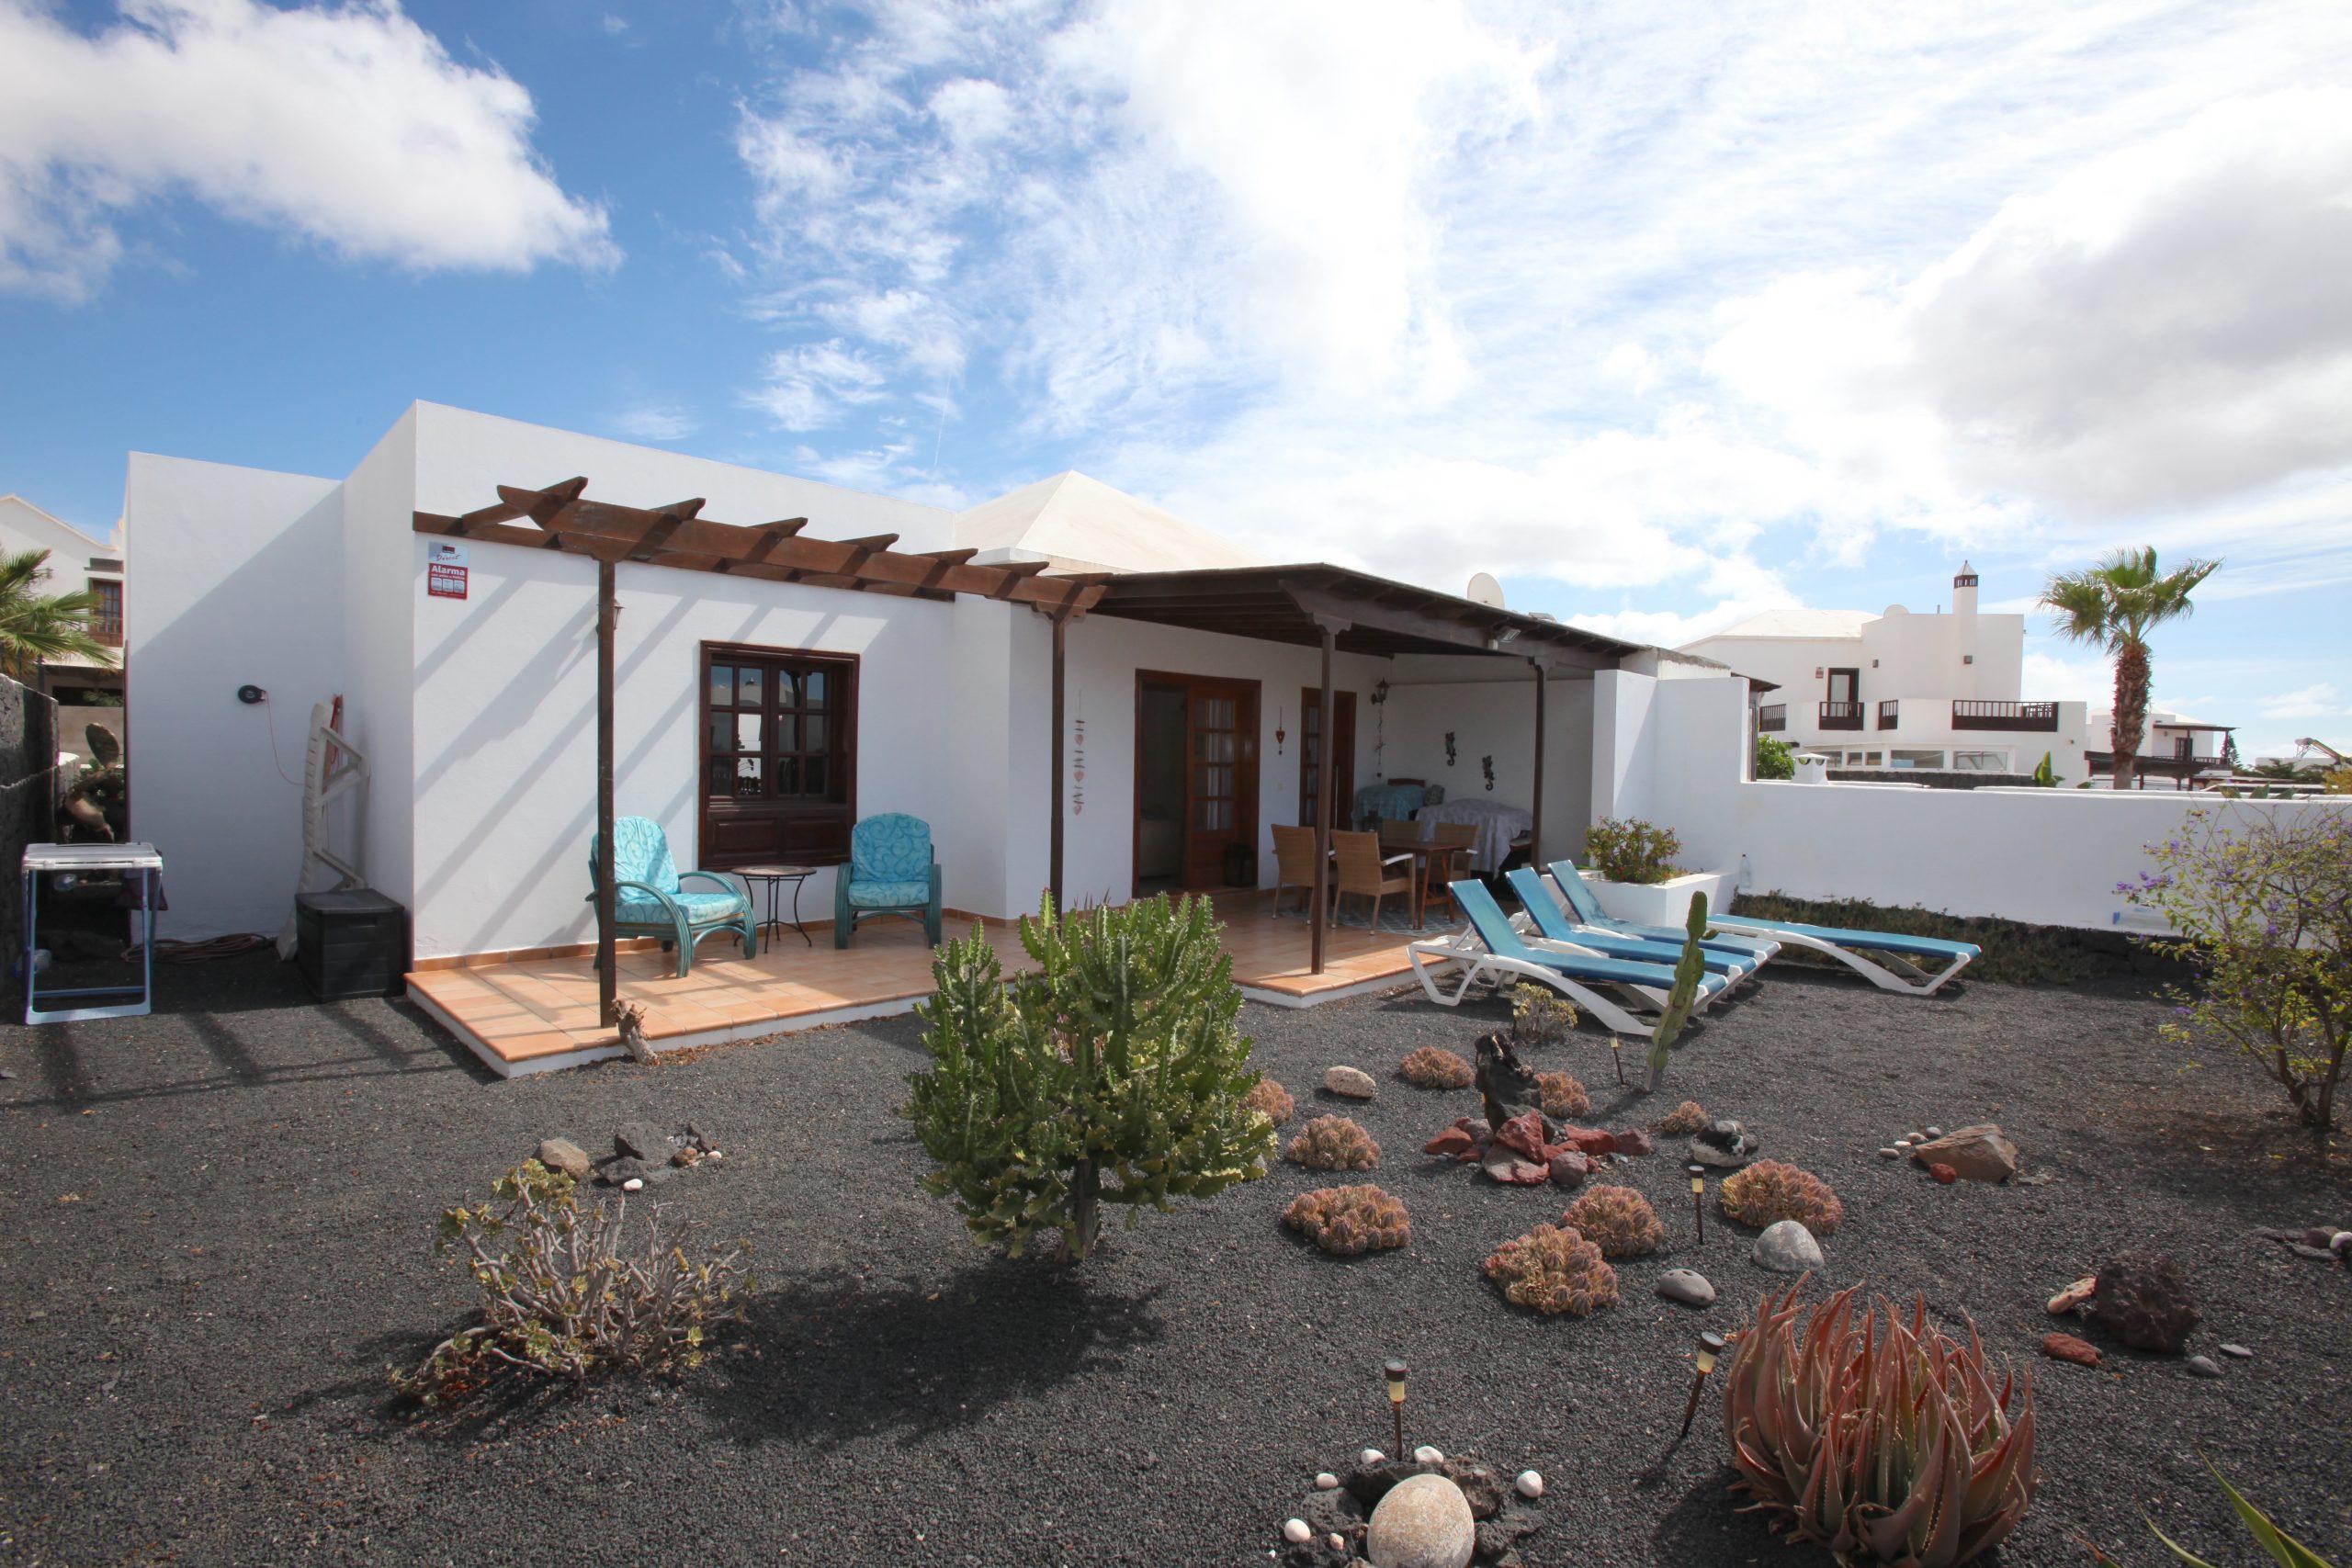 Charming 2 Bedroom Bungalow in Quiet Complex with Good Plot by Communal Pool in Playa Blanca